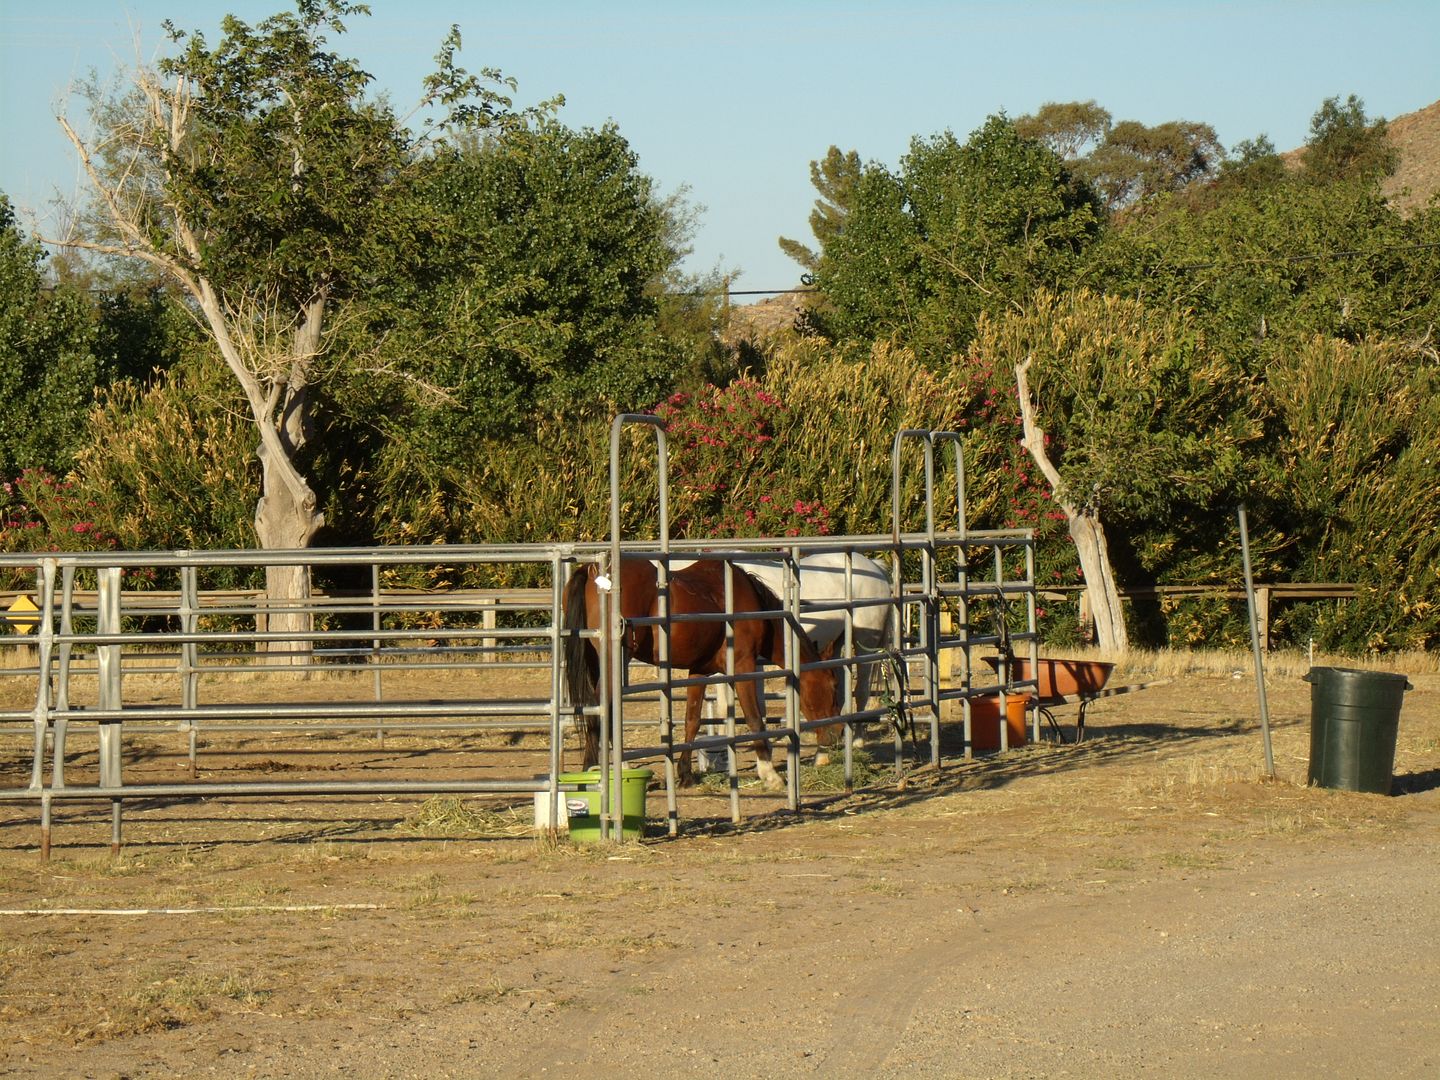 corrals at Butterfield, horses were corralled just steps away from the camp site